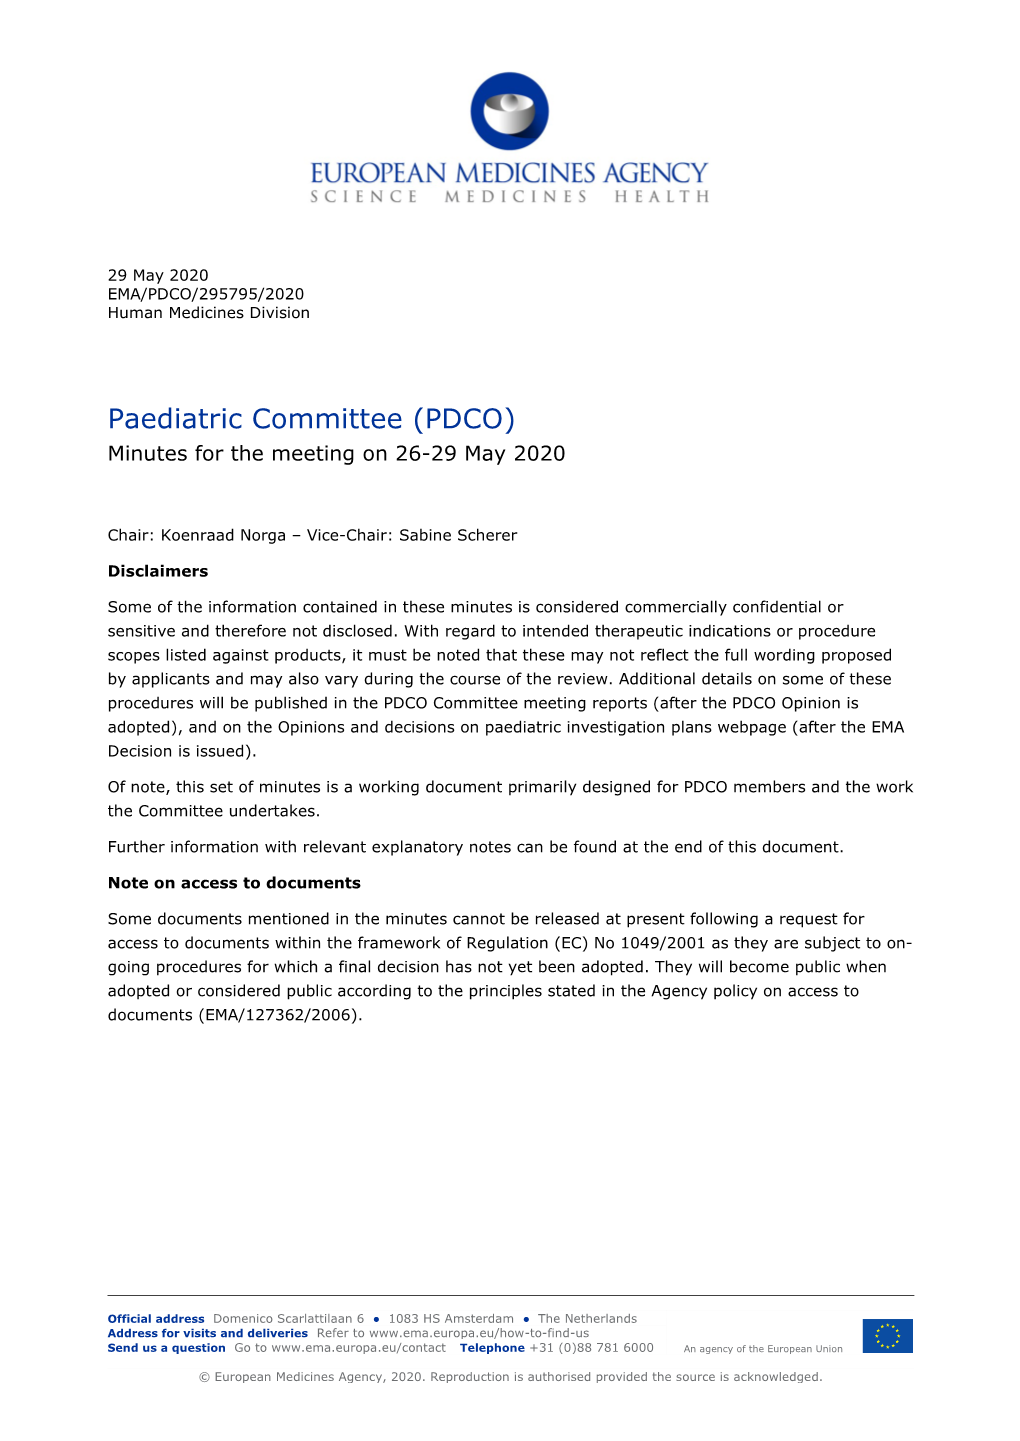 Paediatric Committee (PDCO) Minutes for the Meeting on 26-29 May 2020